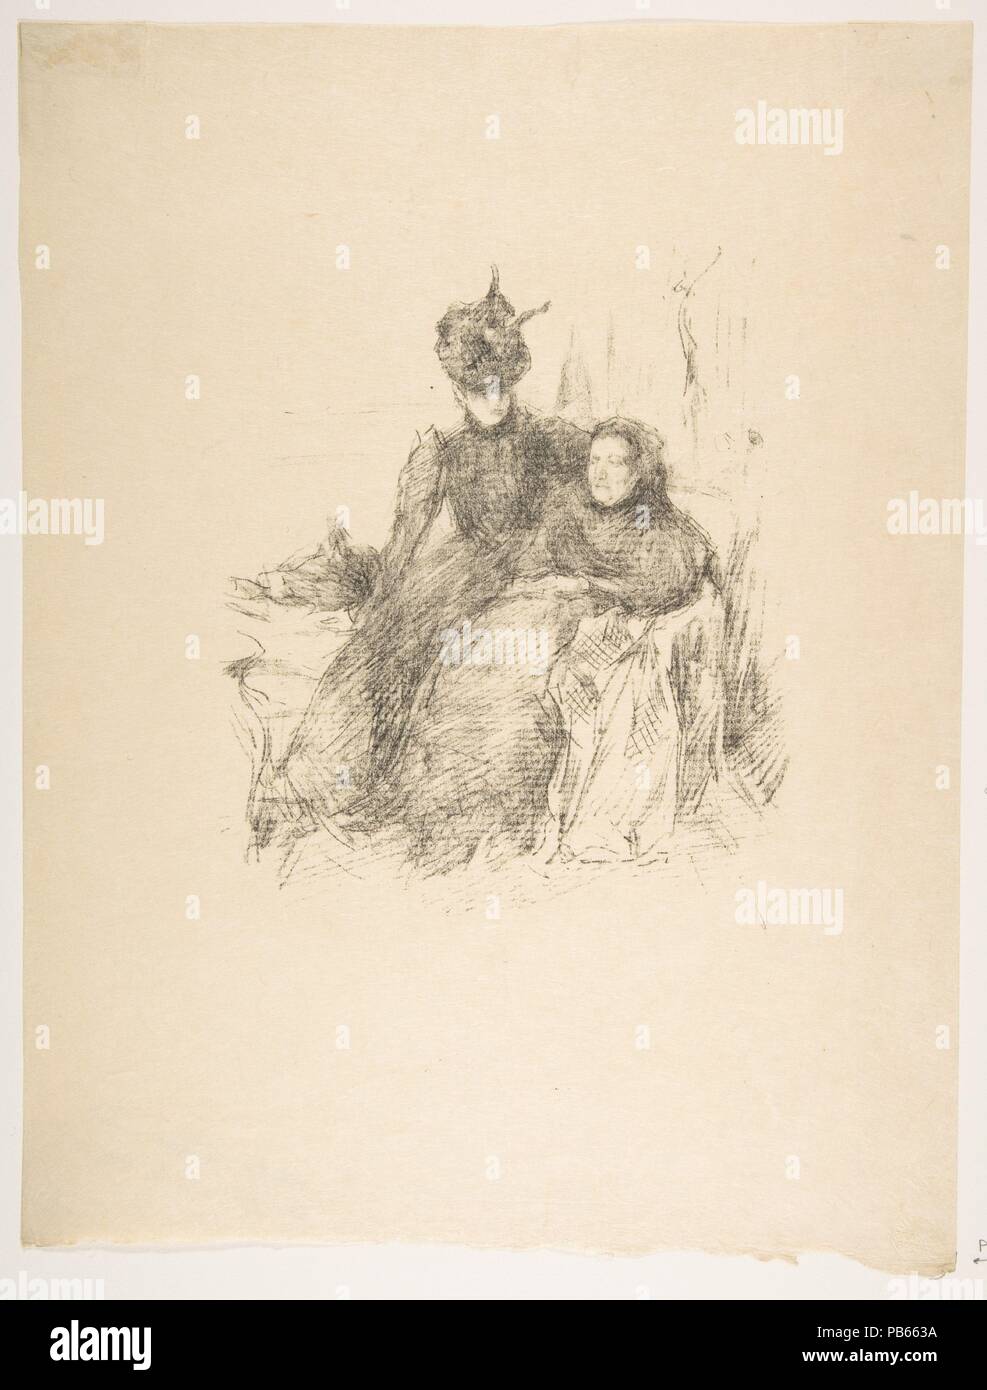 Mother and Daughter (La Mère Malade). Artist: James McNeill Whistler (American, Lowell, Massachusetts 1834-1903 London). Dimensions: Image: 7 3/8 × 6 1/4 in. (18.7 × 15.8 cm)  Sheet: 13 3/8 × 10 3/16 in. (34 × 25.8 cm). Date: 1897. Museum: Metropolitan Museum of Art, New York, USA. Stock Photo